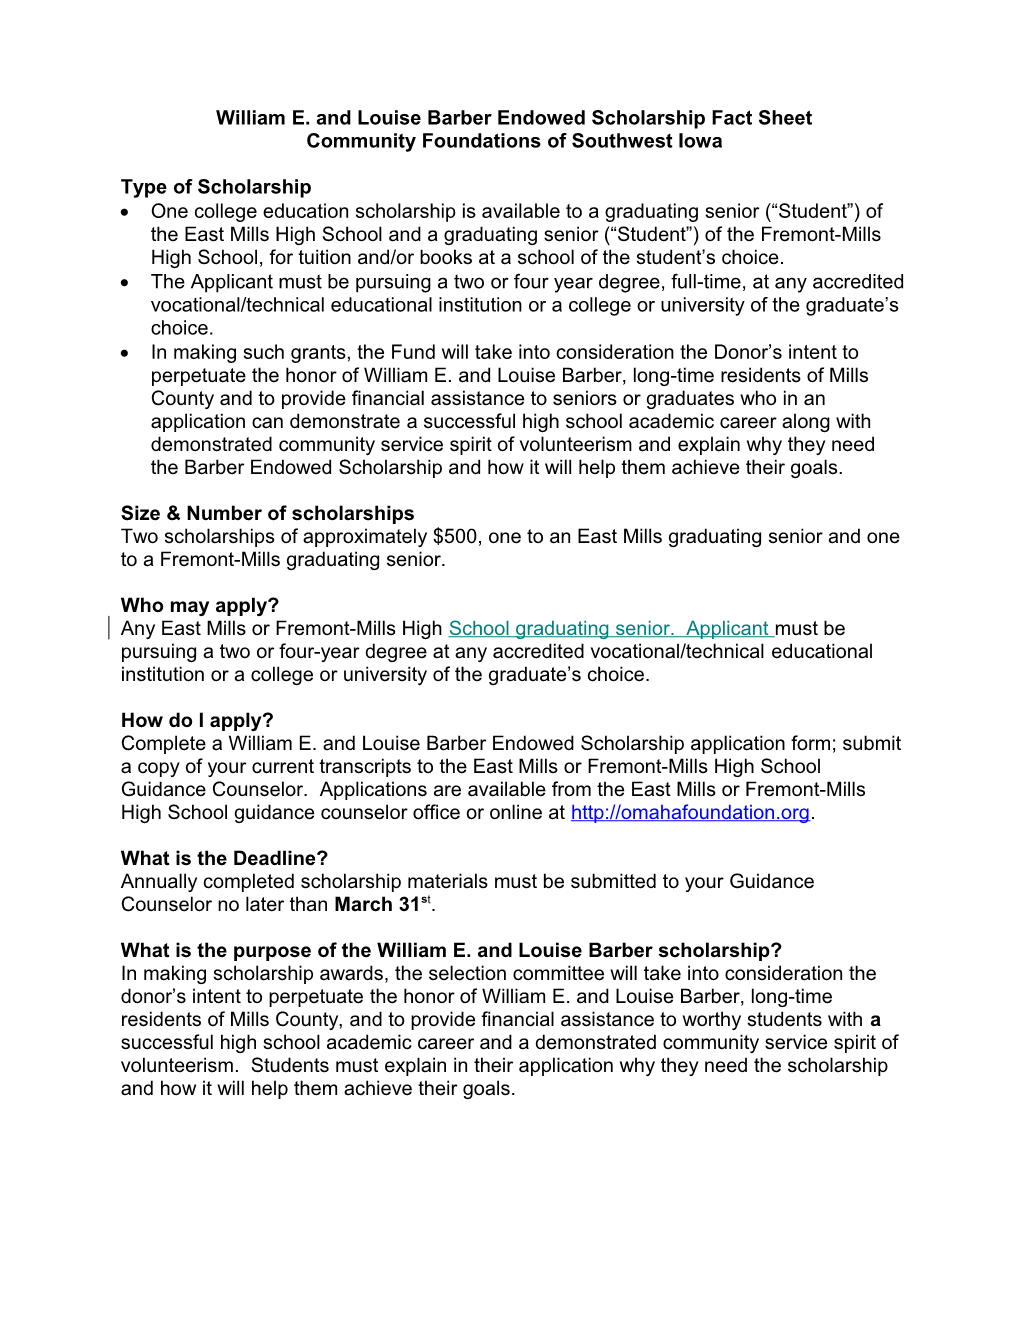 William E. and Louise Barberendowed Scholarship Fact Sheet